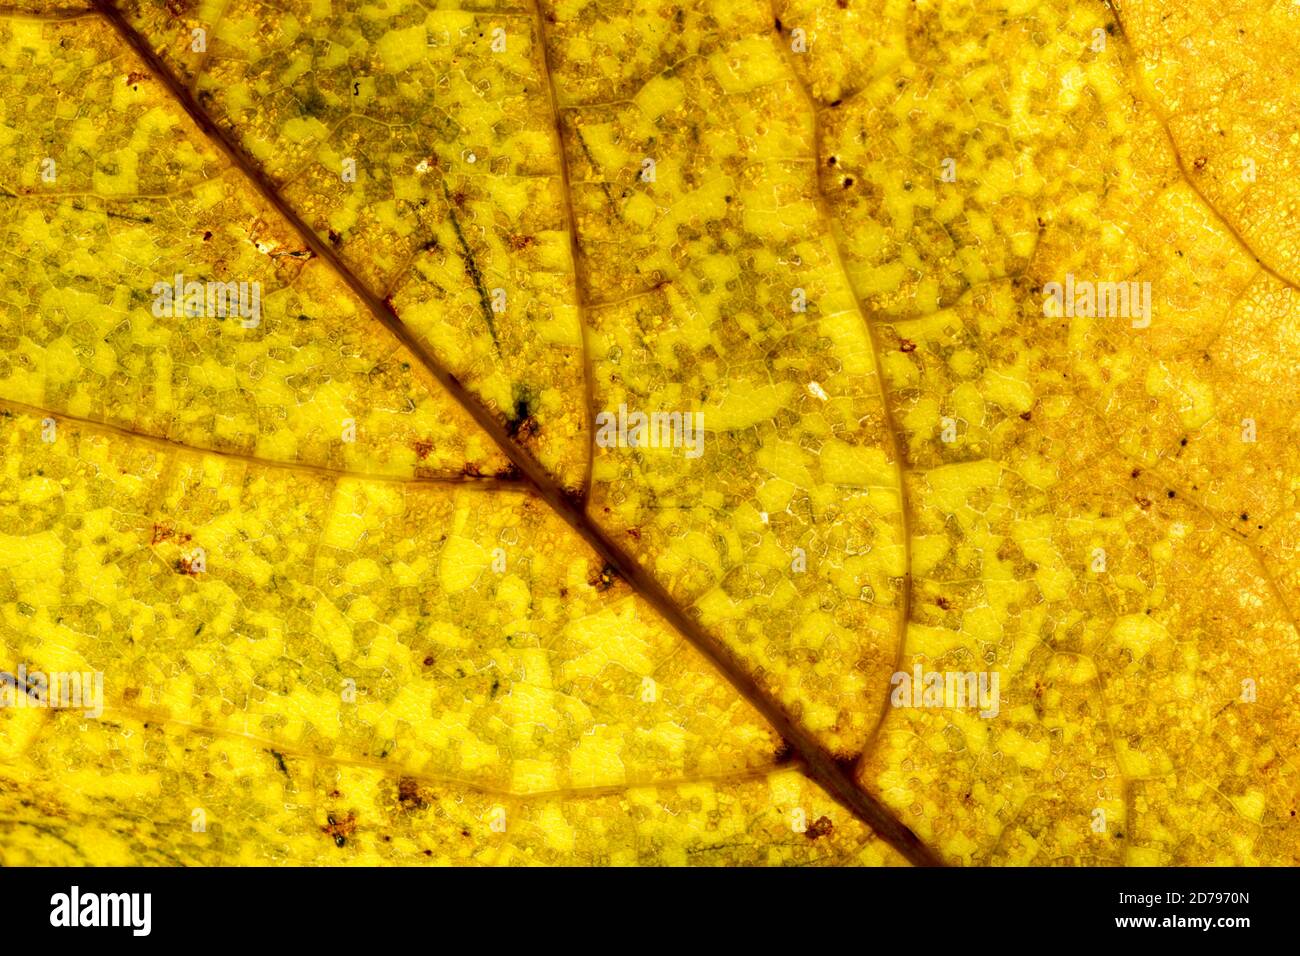 Close up detailed view of a sycamore tree (Acer pseudoplatanus) leaf showing veins and cell structure breaking down as autumn progresses Stock Photo